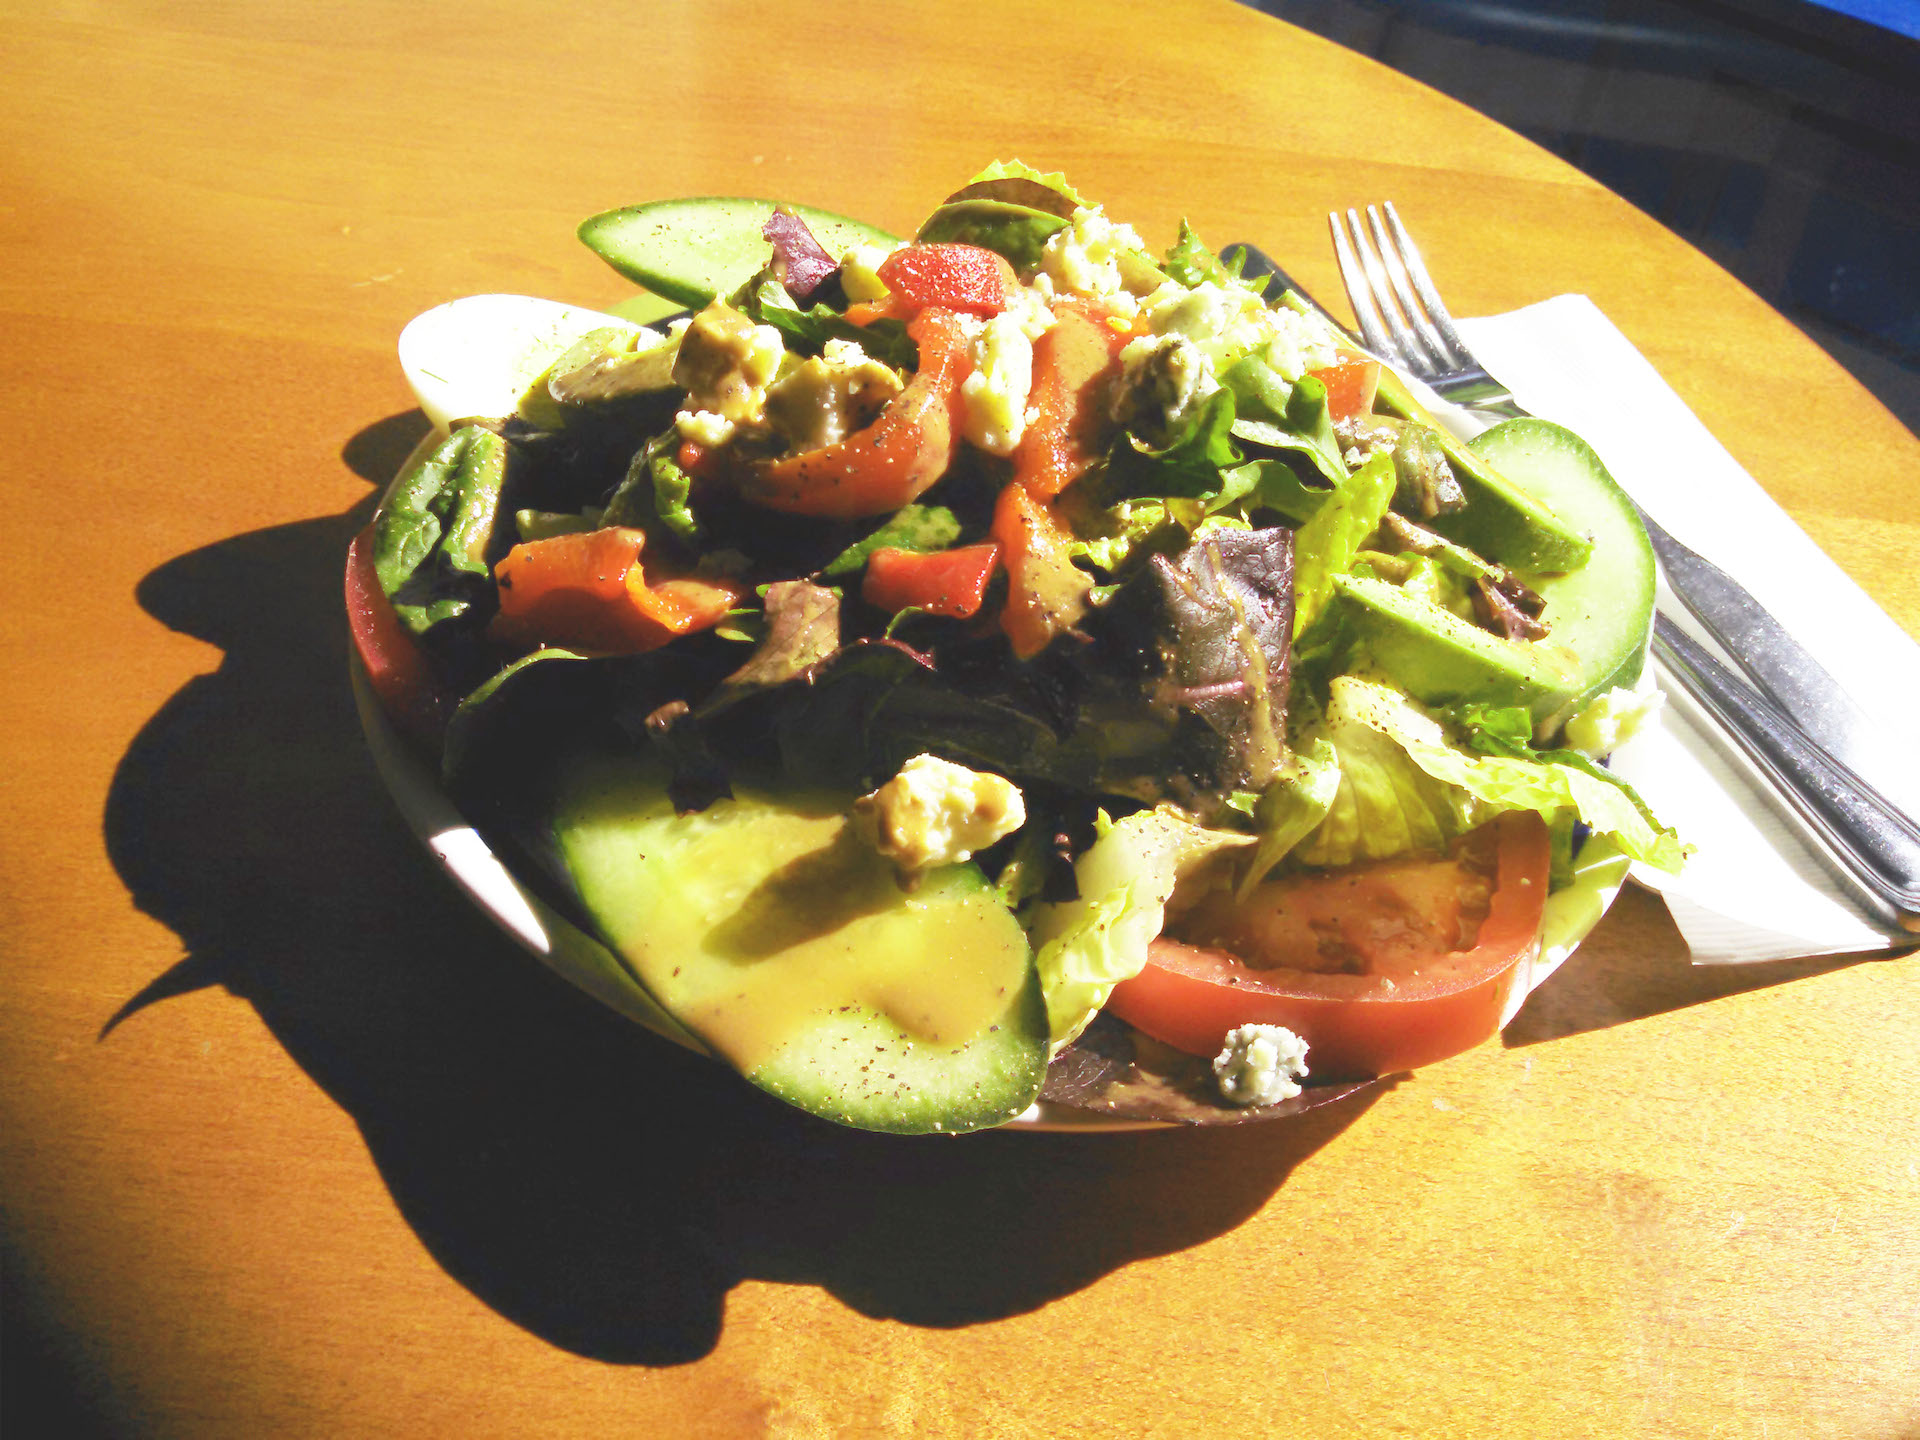 The Maison salad in the setting sunlight